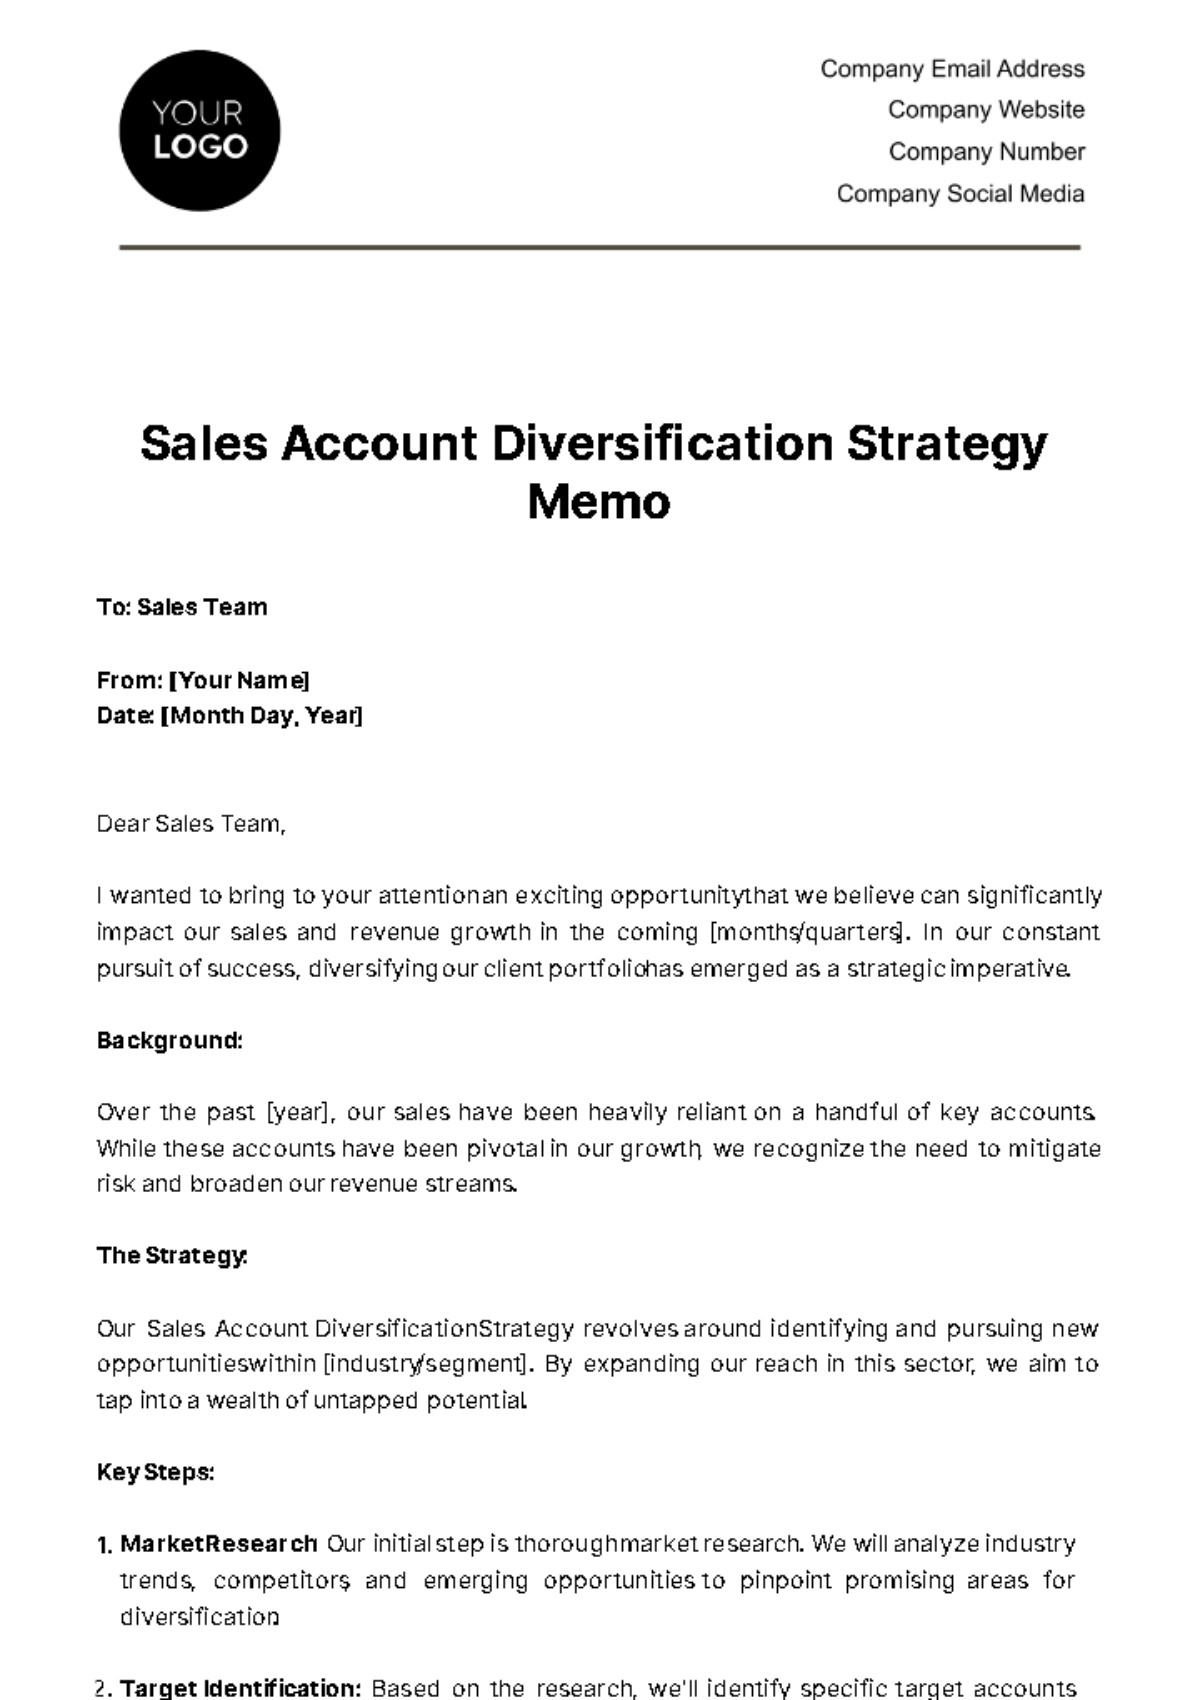 Free Sales Account Diversification Strategy Memo Template